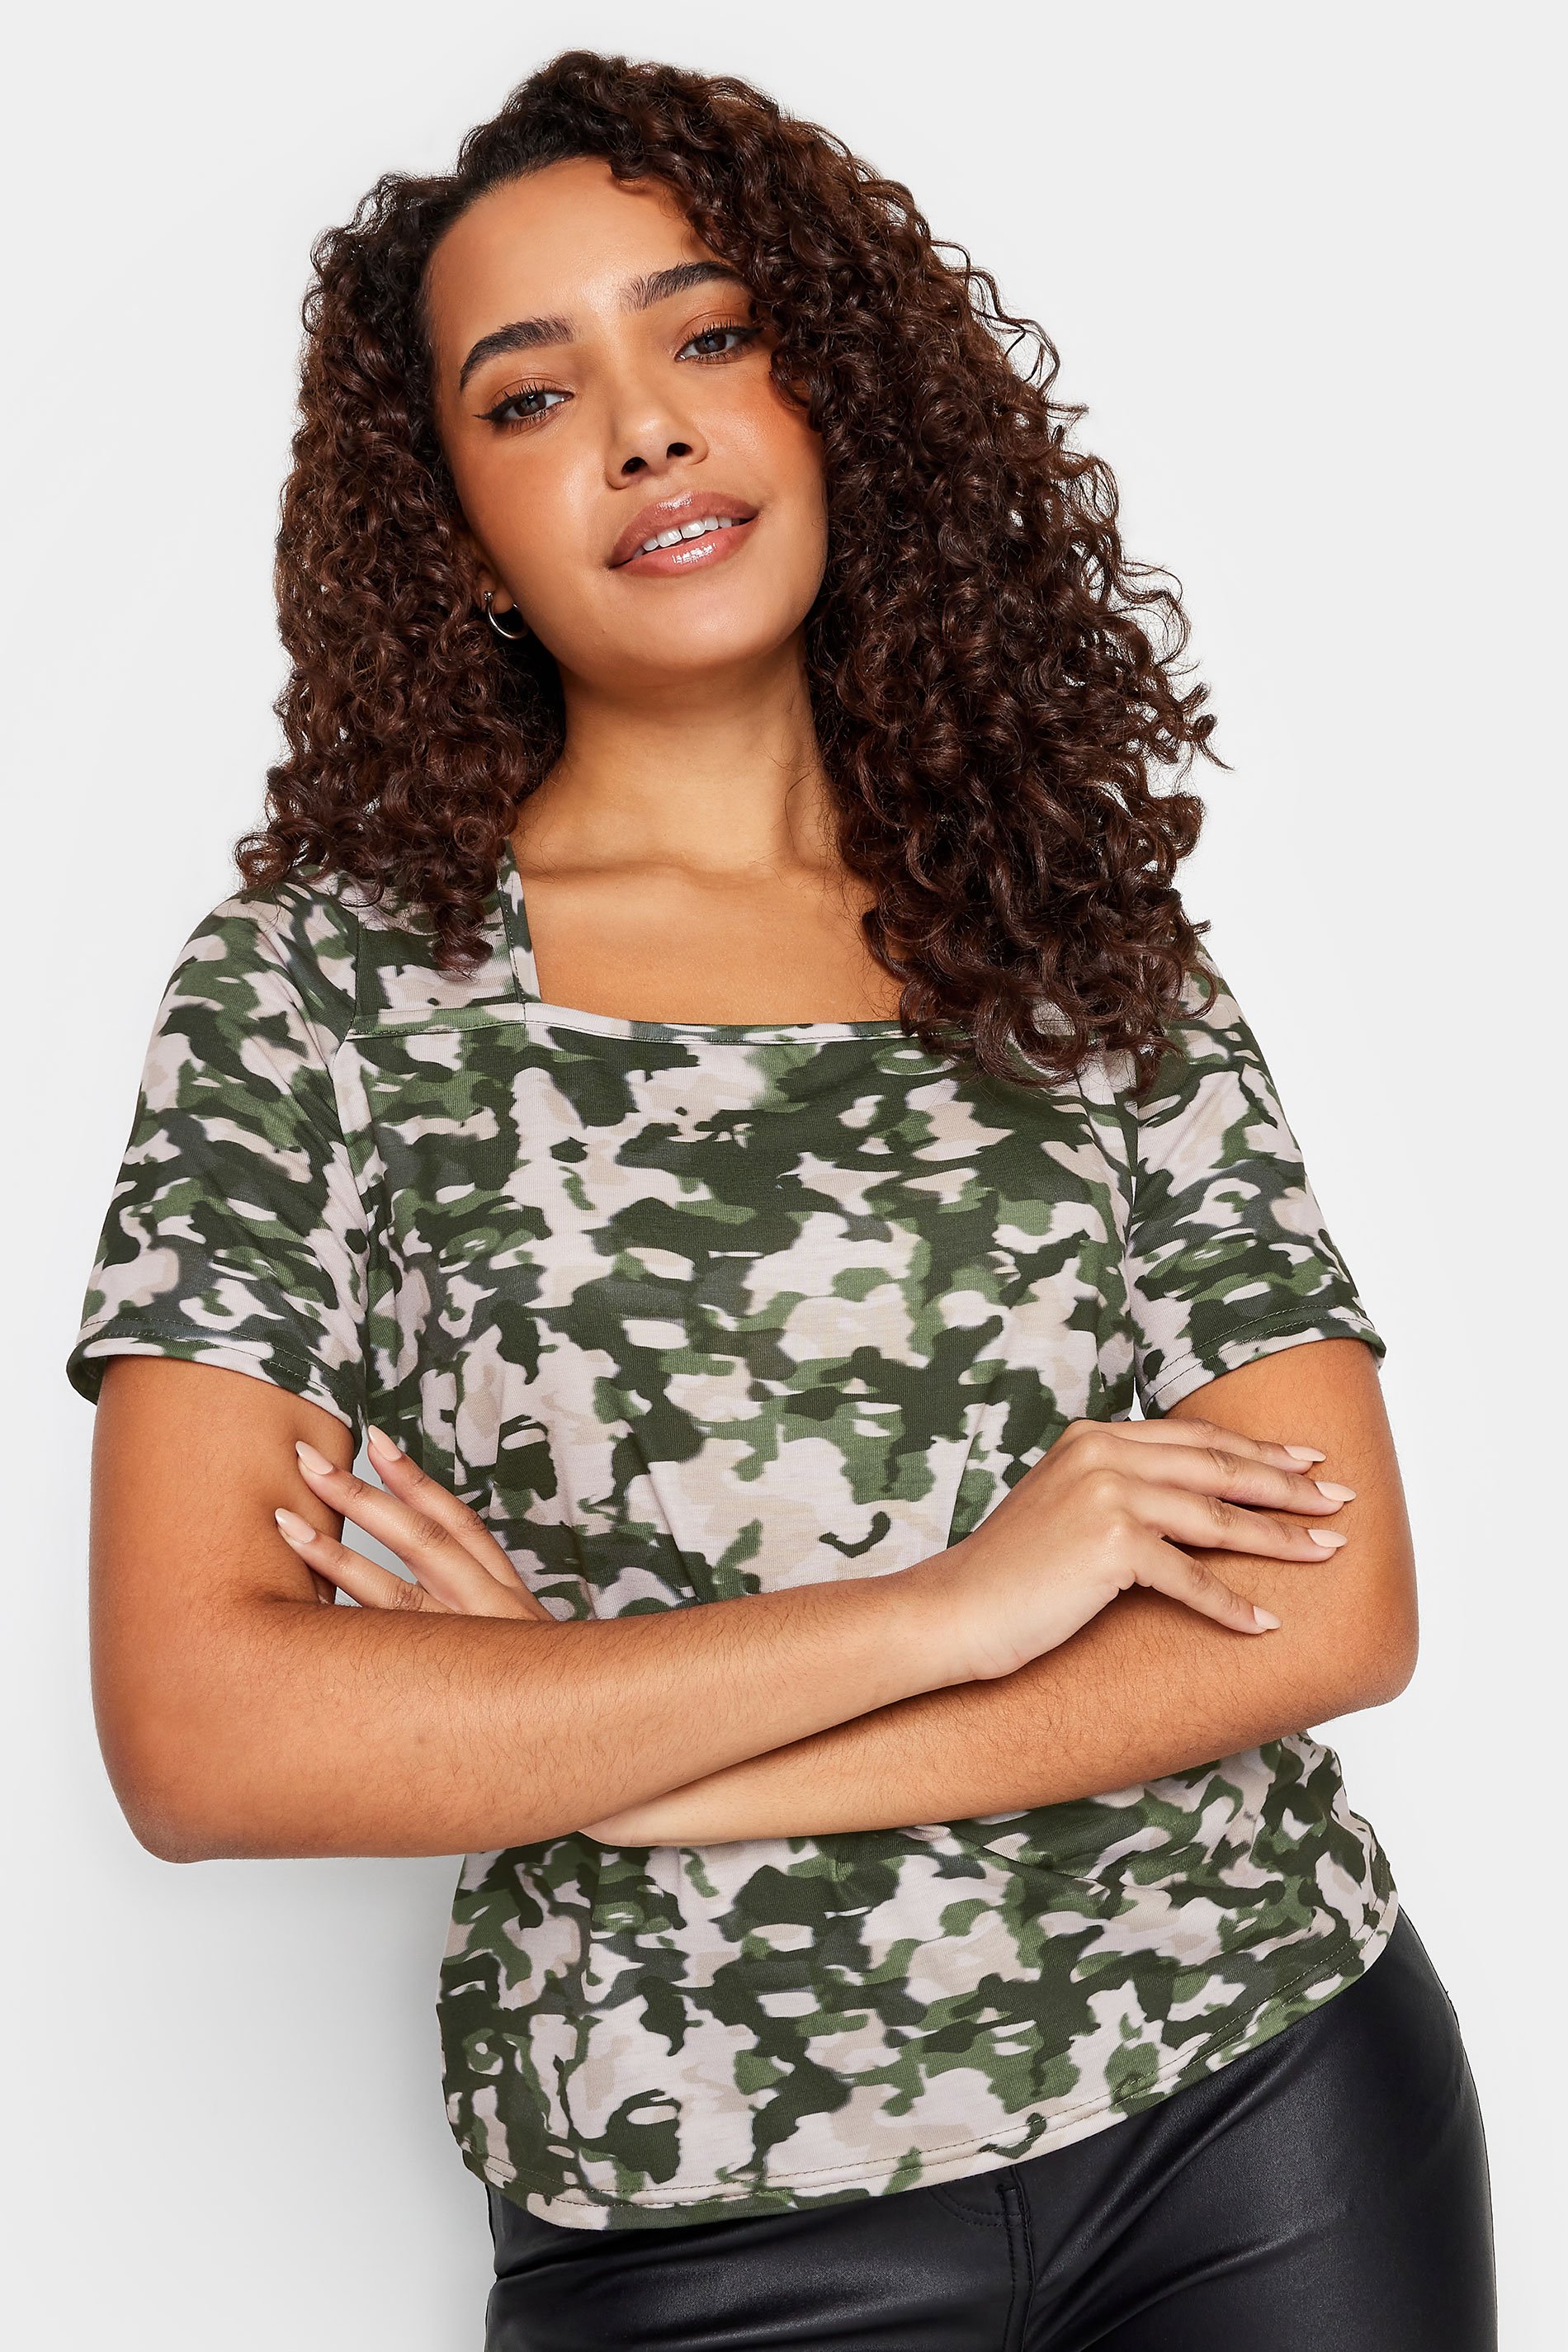 M&Co Khaki Green Abstract Print Square Neck Top | M&Co 1